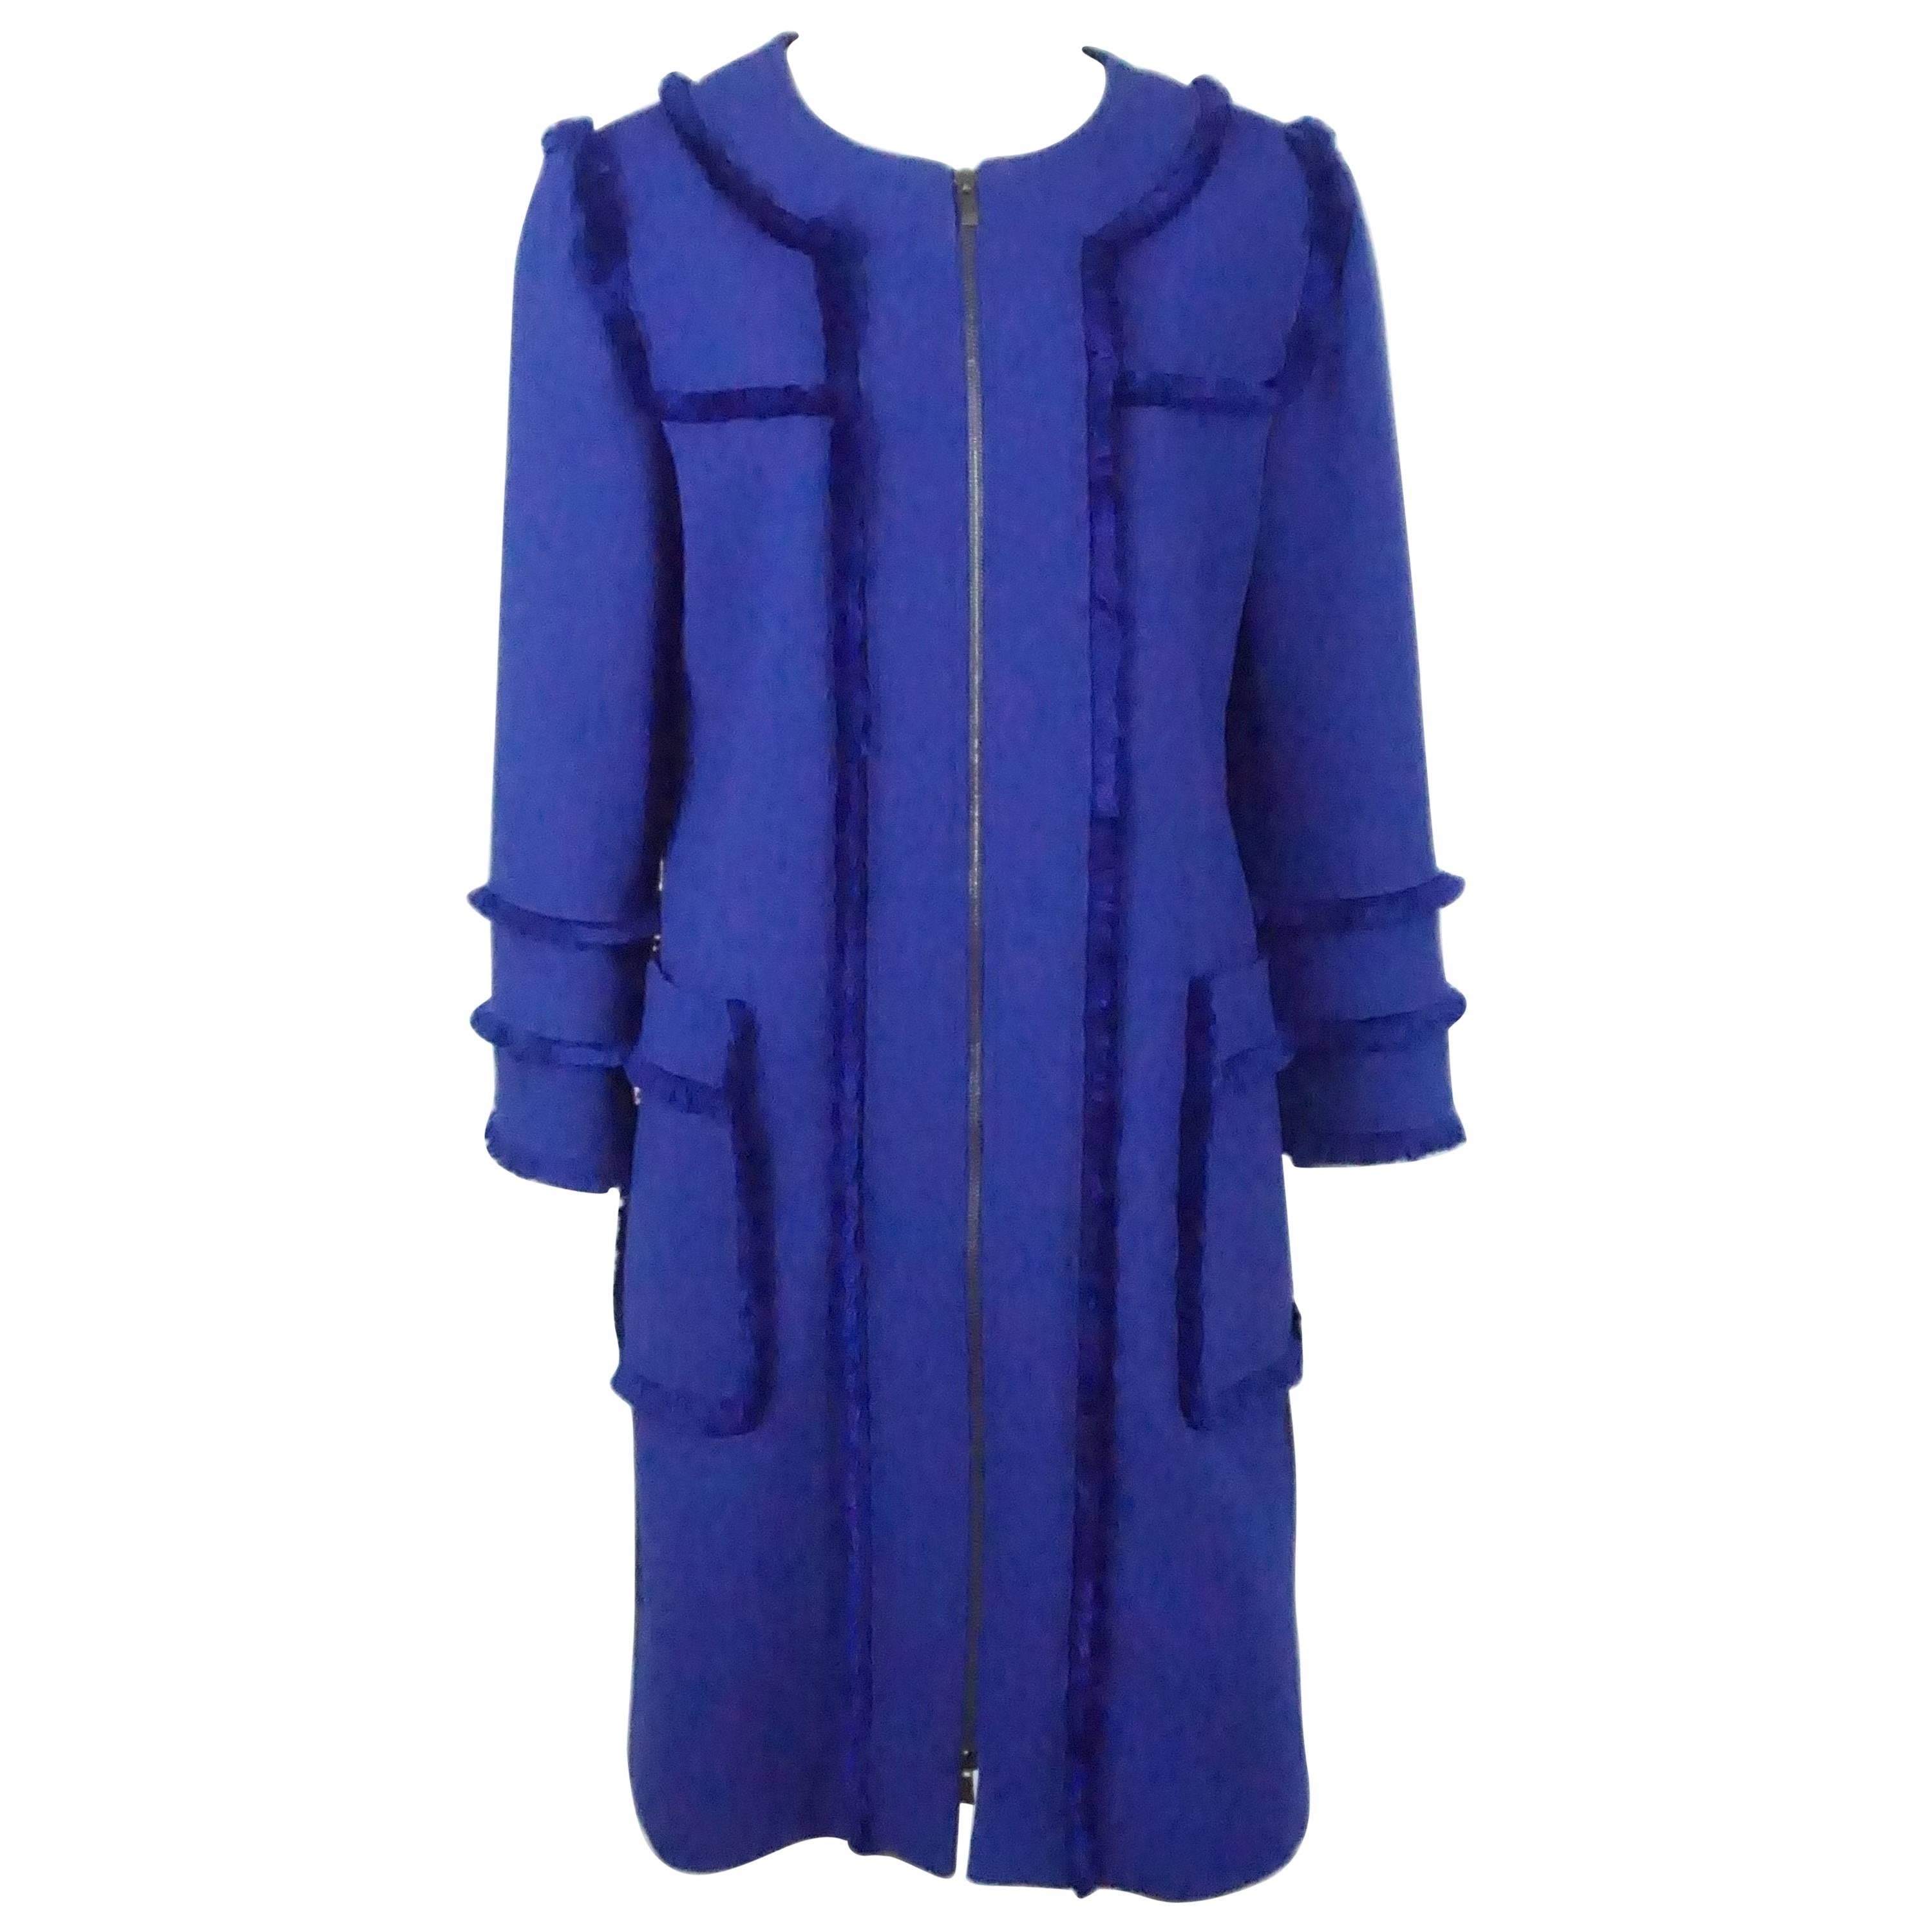 Andrew GN Royal Blue Wool Coat with Fringe - 42